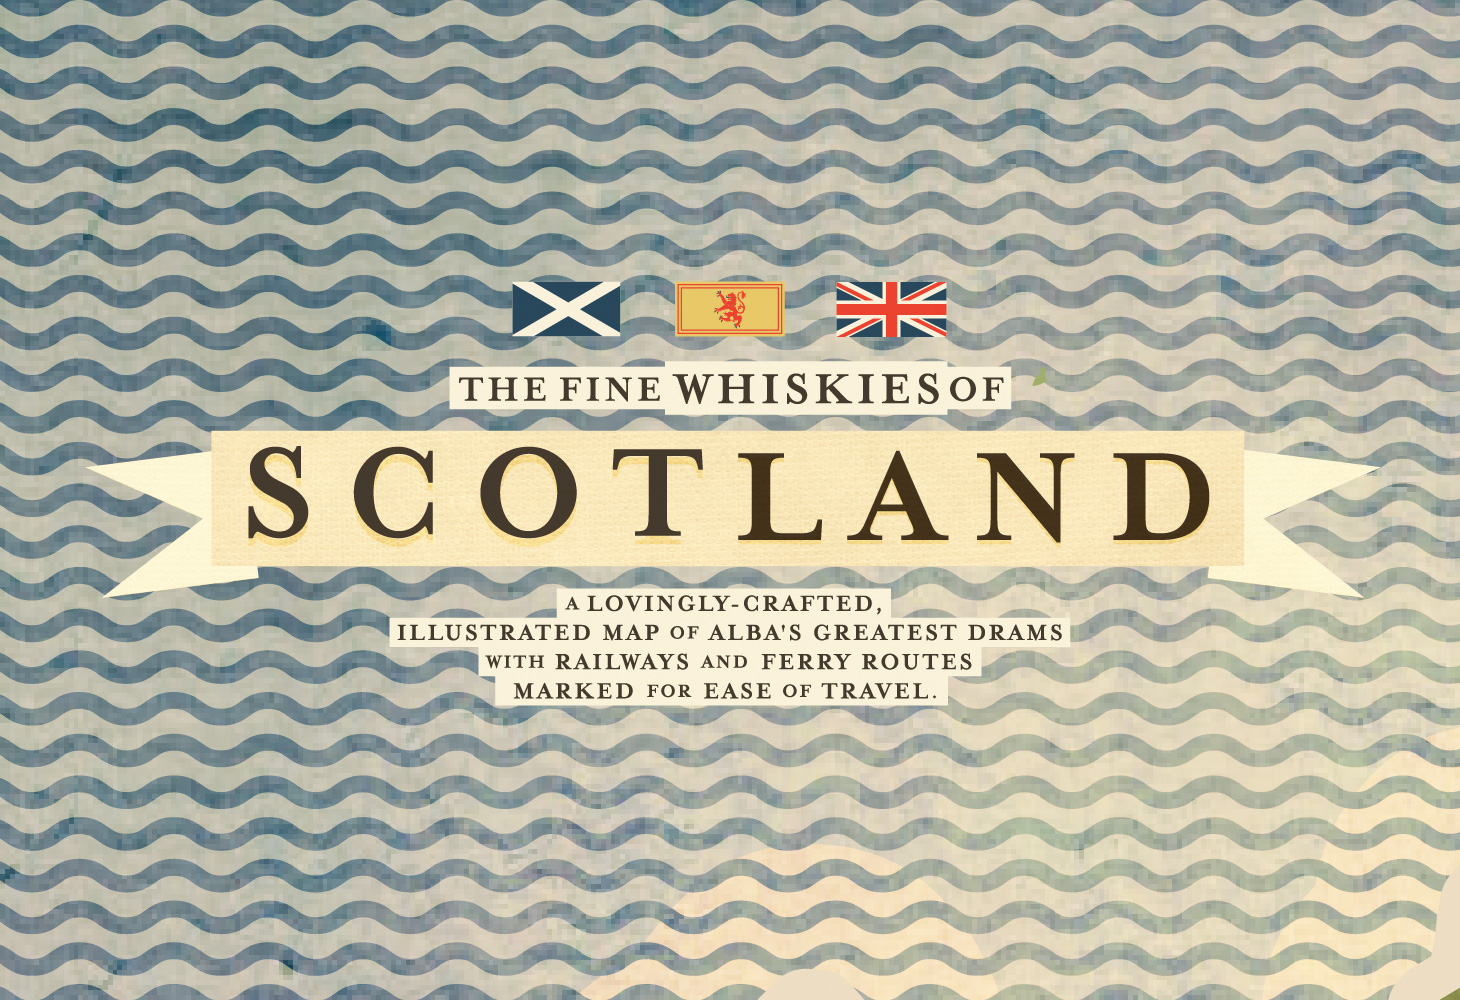 Whiskies of Scotland - Map - Title